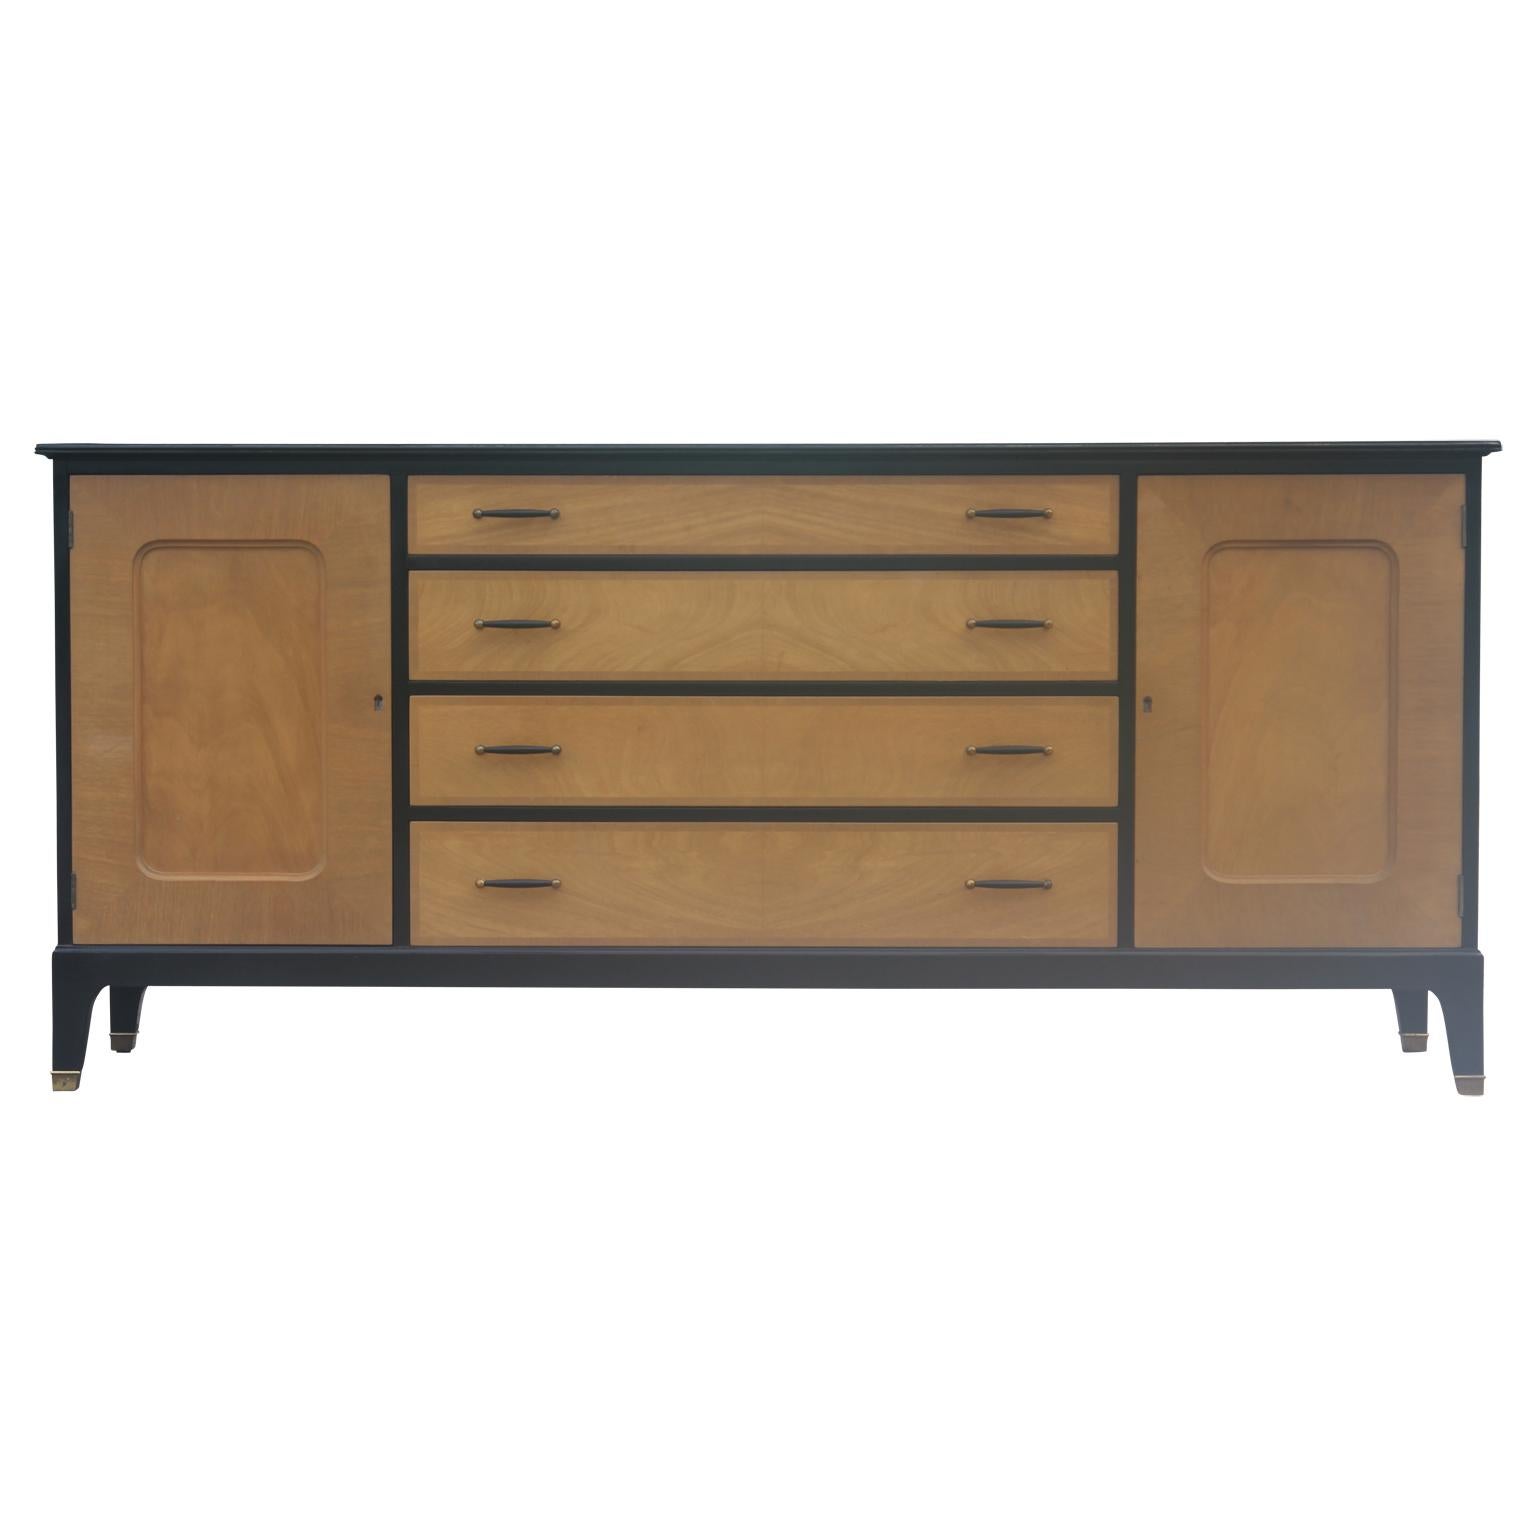 Modern Two-Tone Four-Drawer Credenza or Sideboard by Johnson Furniture